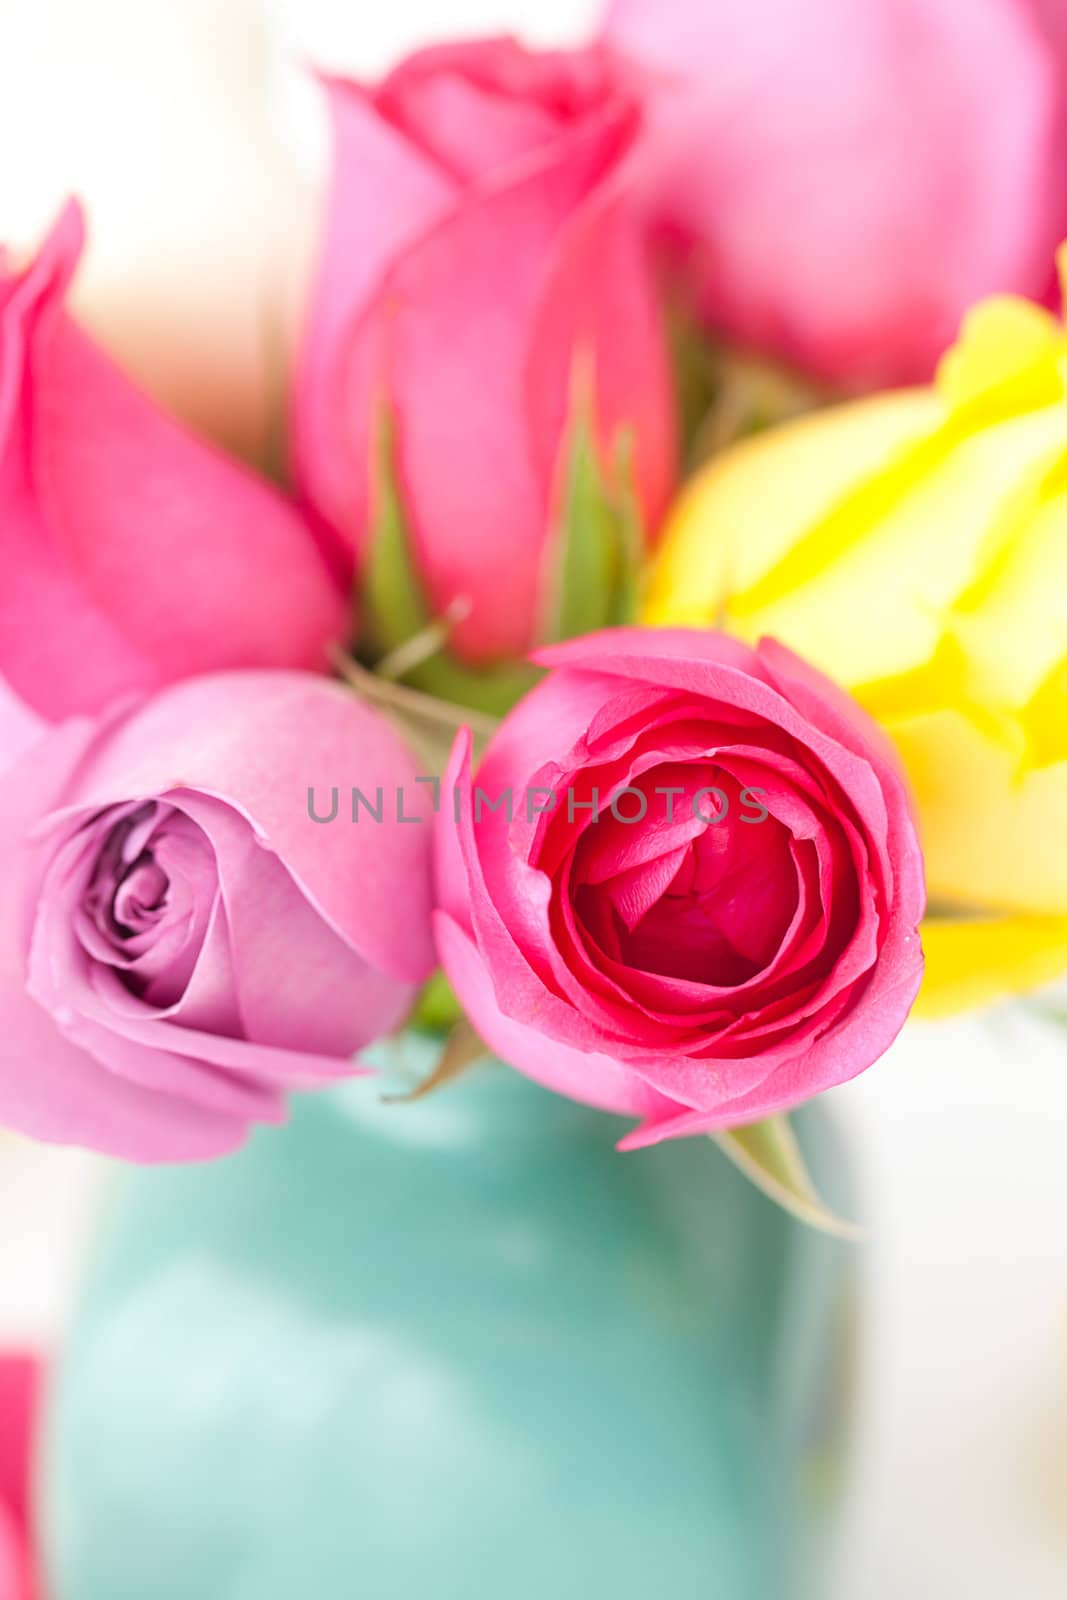 bouquet of colorful roses in vase and petals  by jannyjus